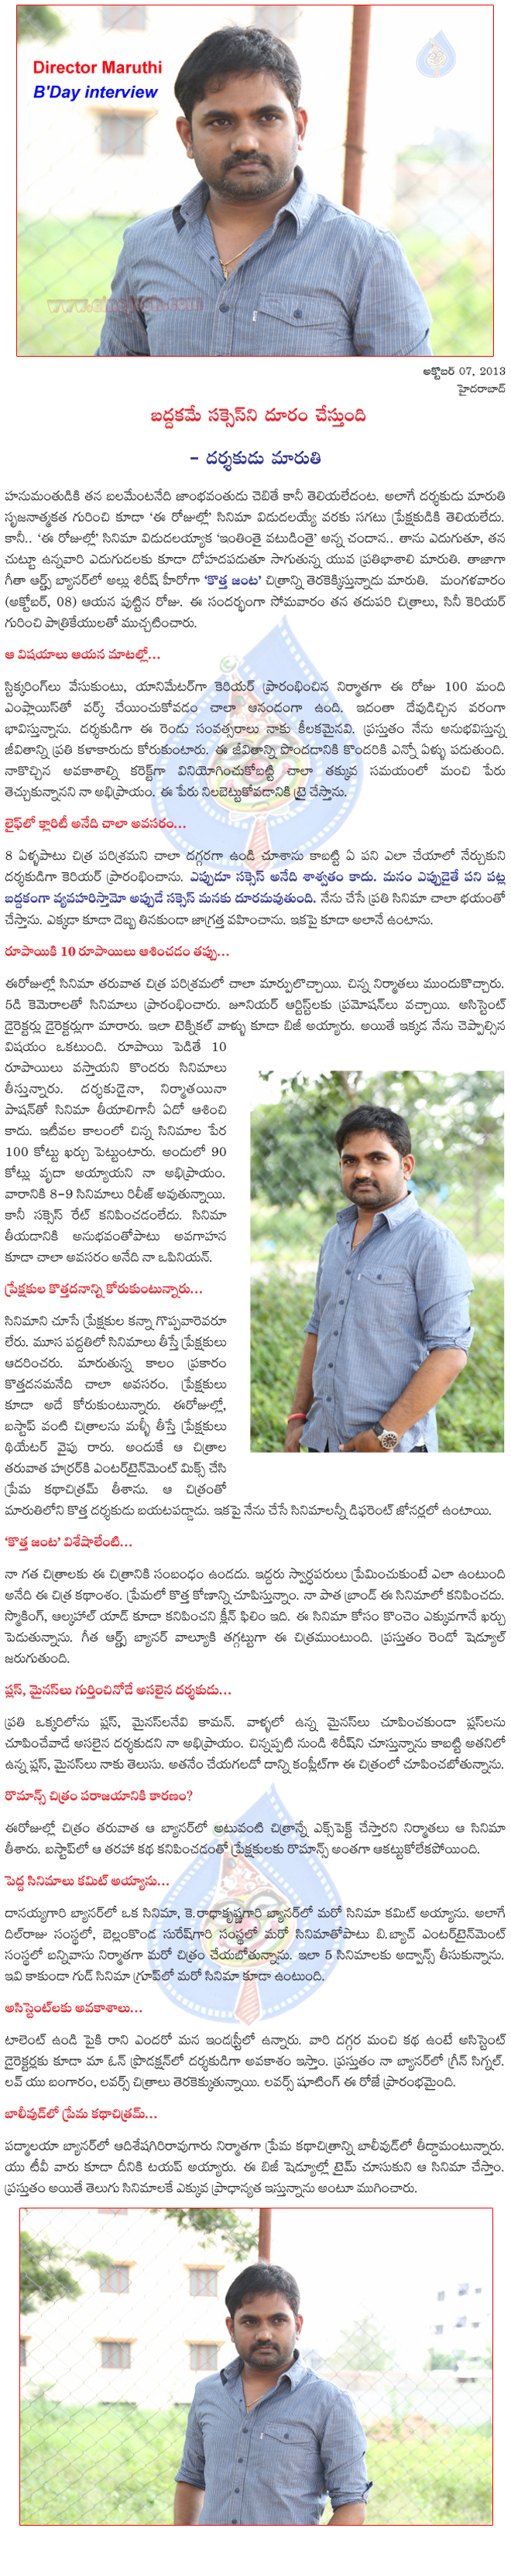 maruthi interview,chitchat with maruthi,happy birthday to maruthi,director maruthi interview,,  maruthi interview, chitchat with maruthi, happy birthday to maruthi, director maruthi interview, , 